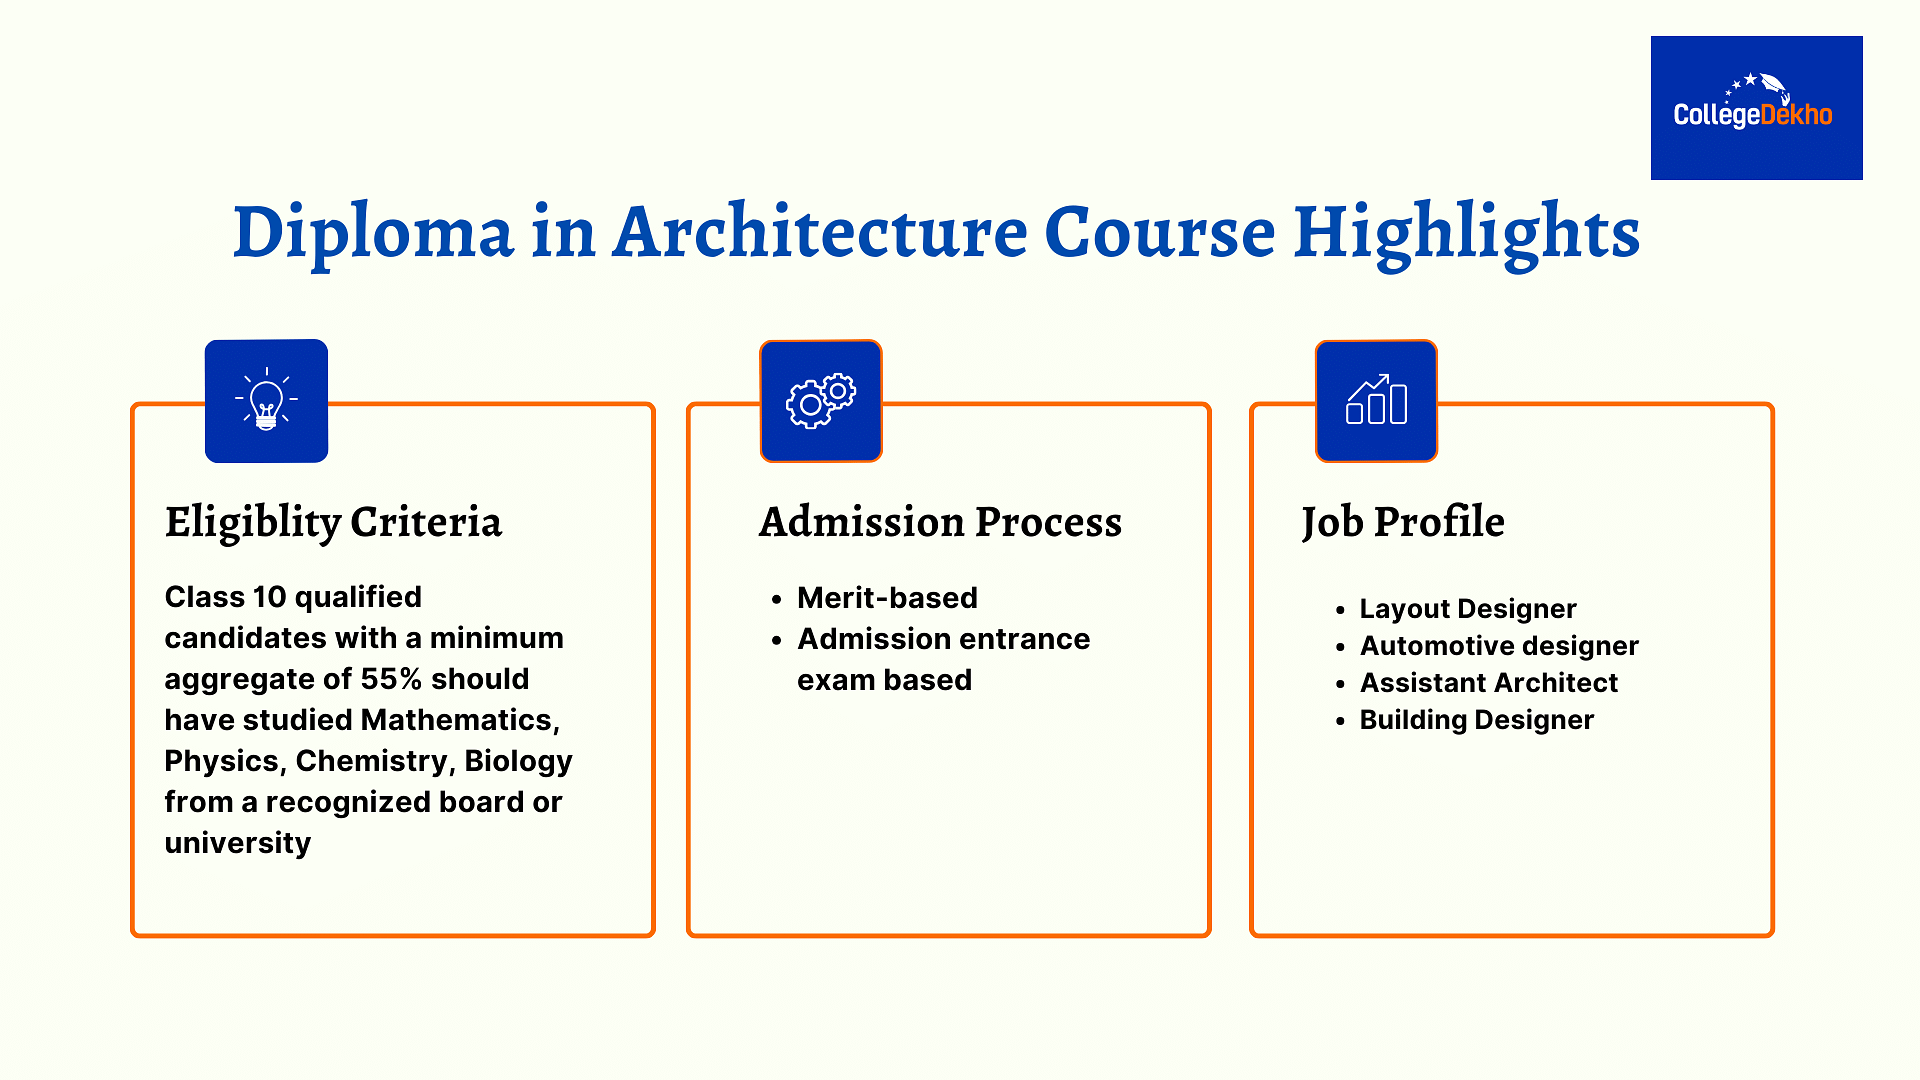 Diploma in Architecture Course Highlights